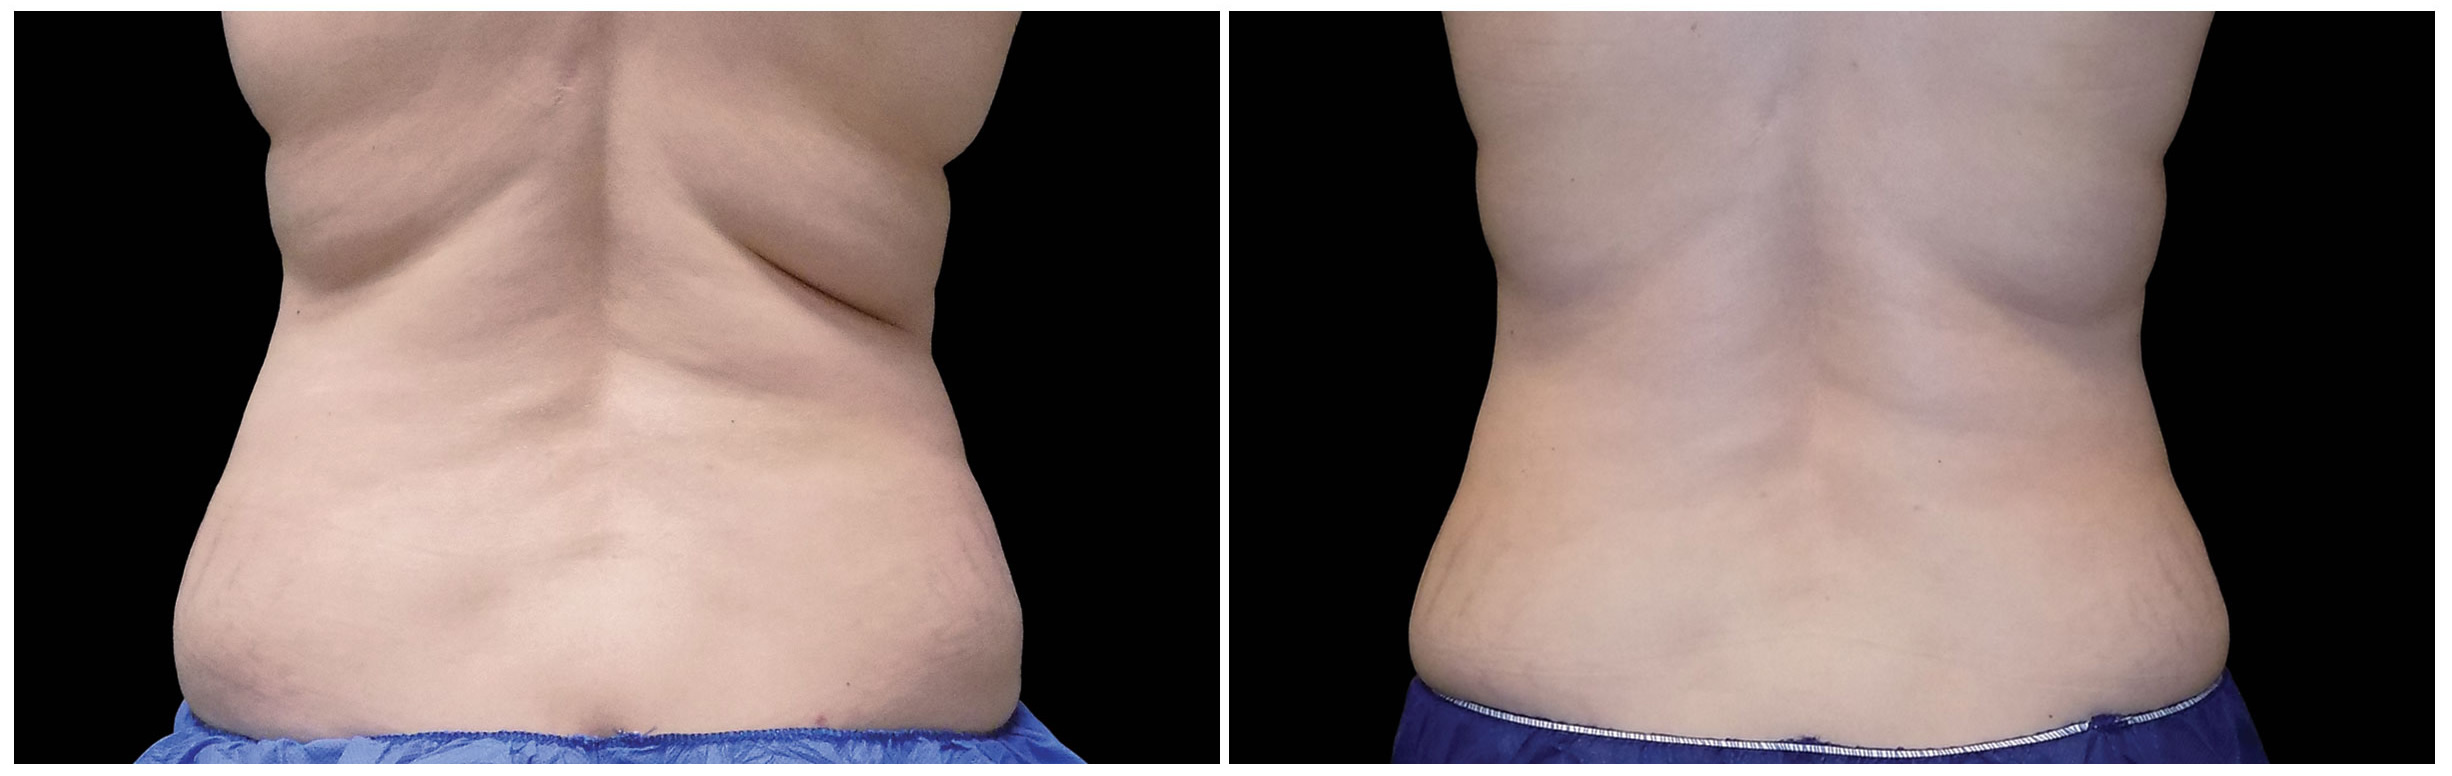 CoolSculpting for Stomach, Belly Fat & Abs , CoolSculpting vs Liposuction